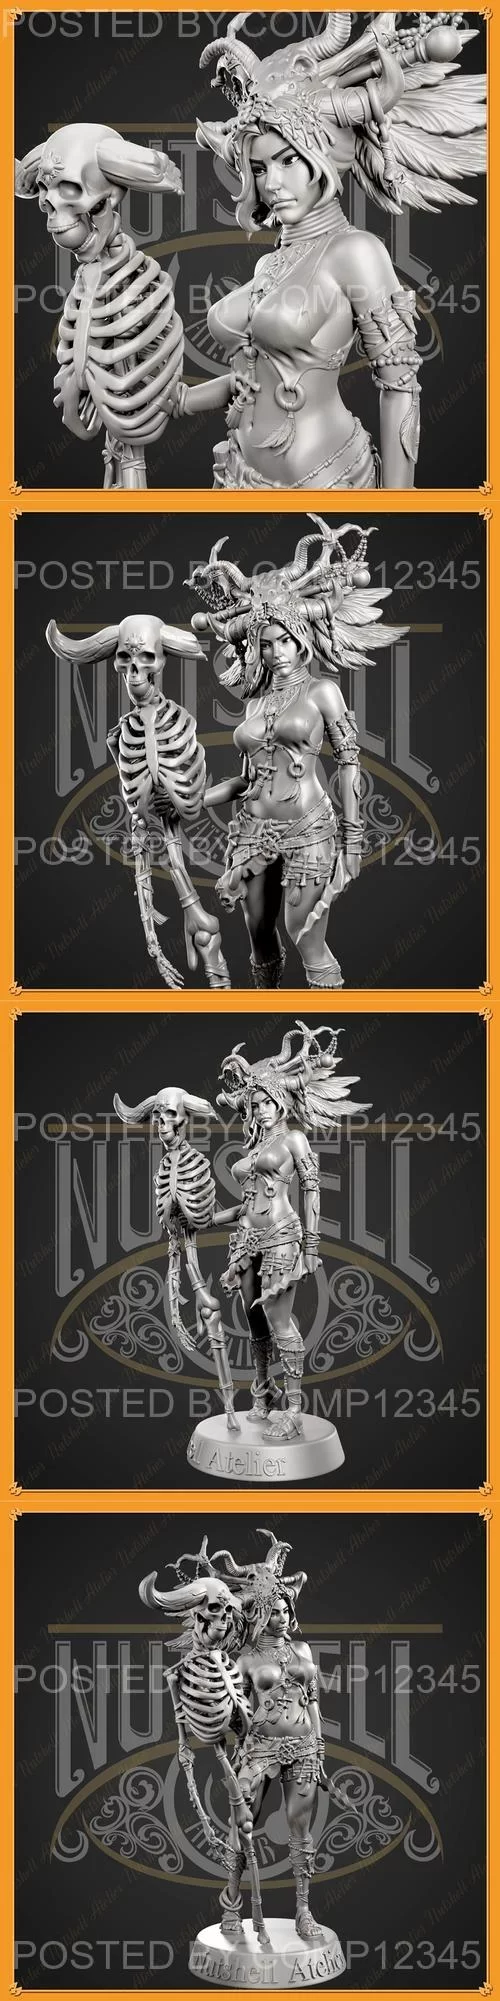 Nutshell atelier - Witch Doctor 3D Print